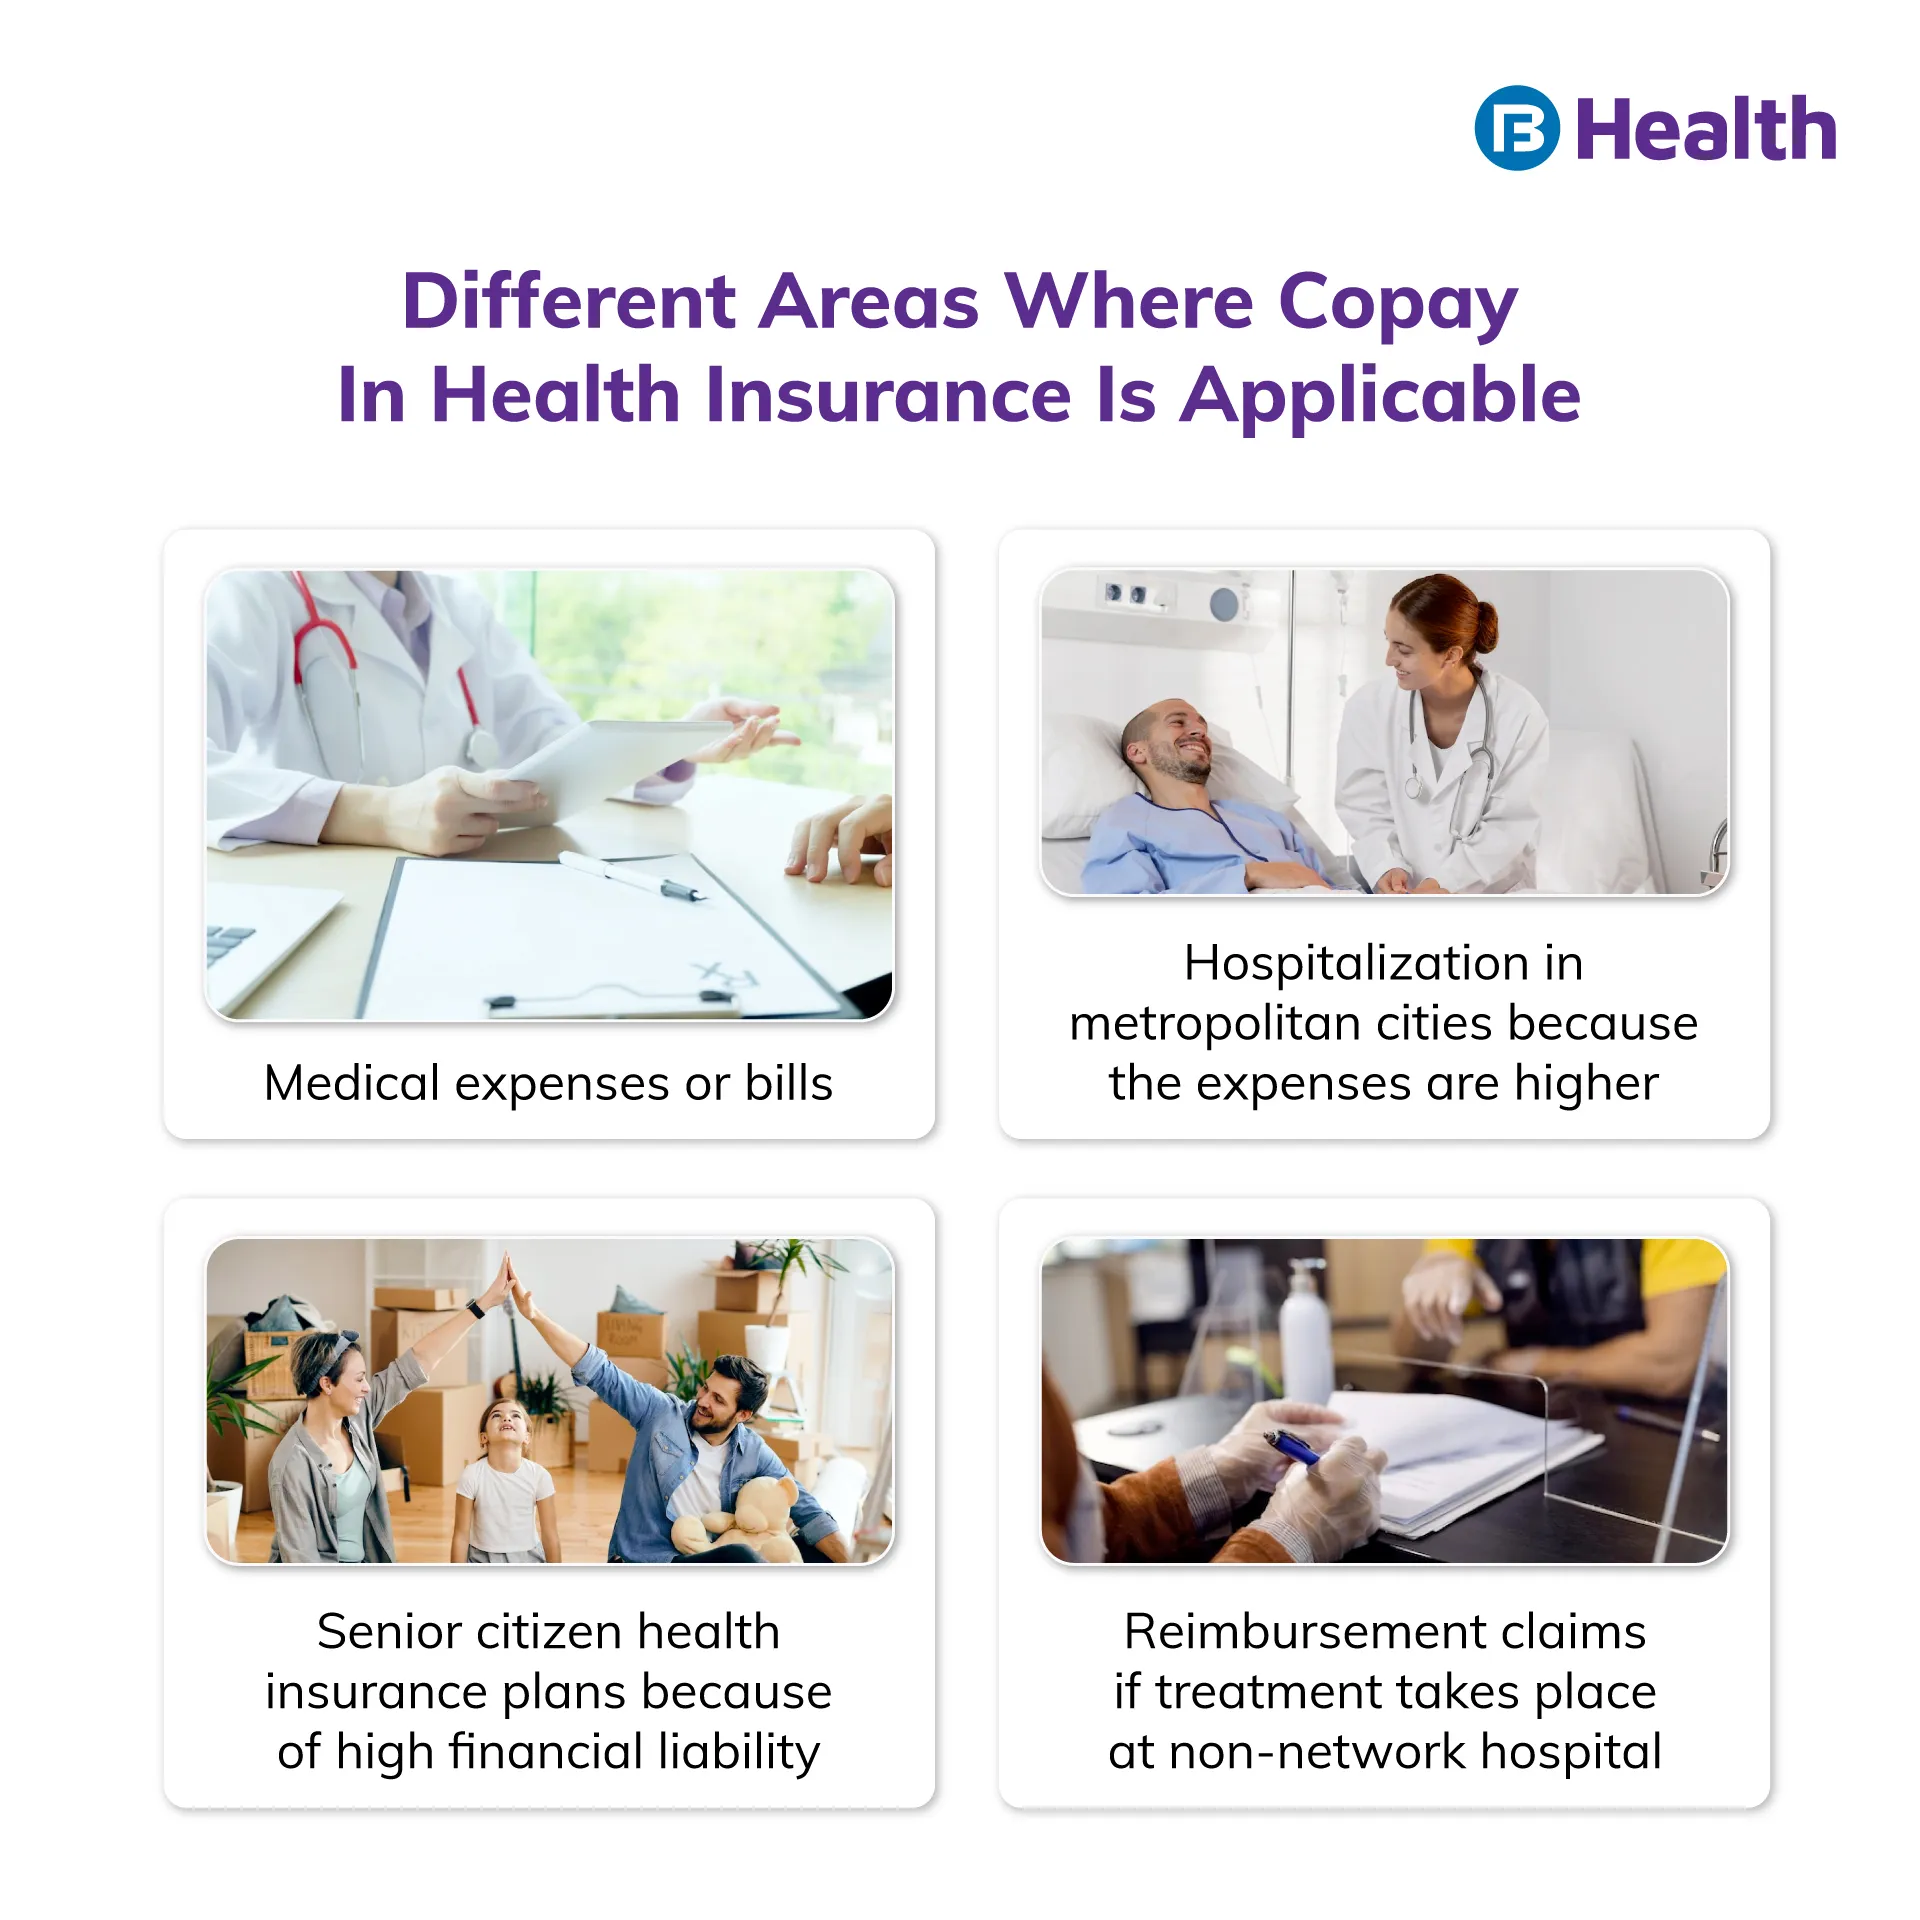 Copay in health insurance